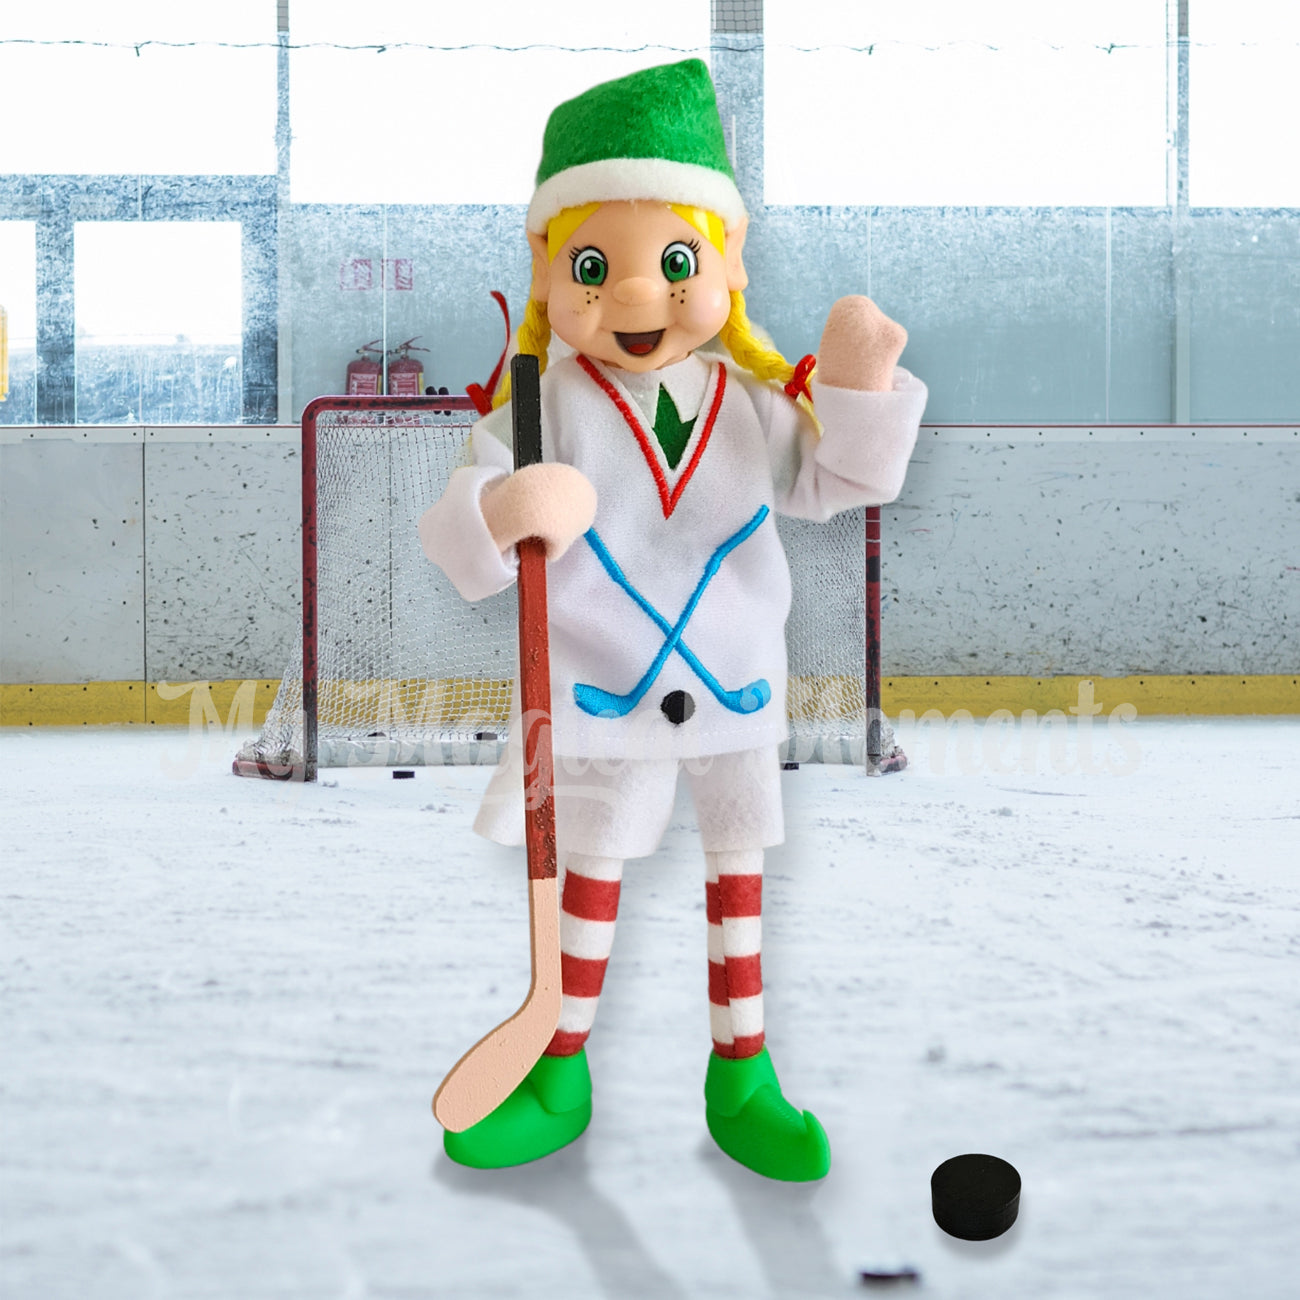 My elf friend playing ice hockey wearing a jersey and holding a hockey stick